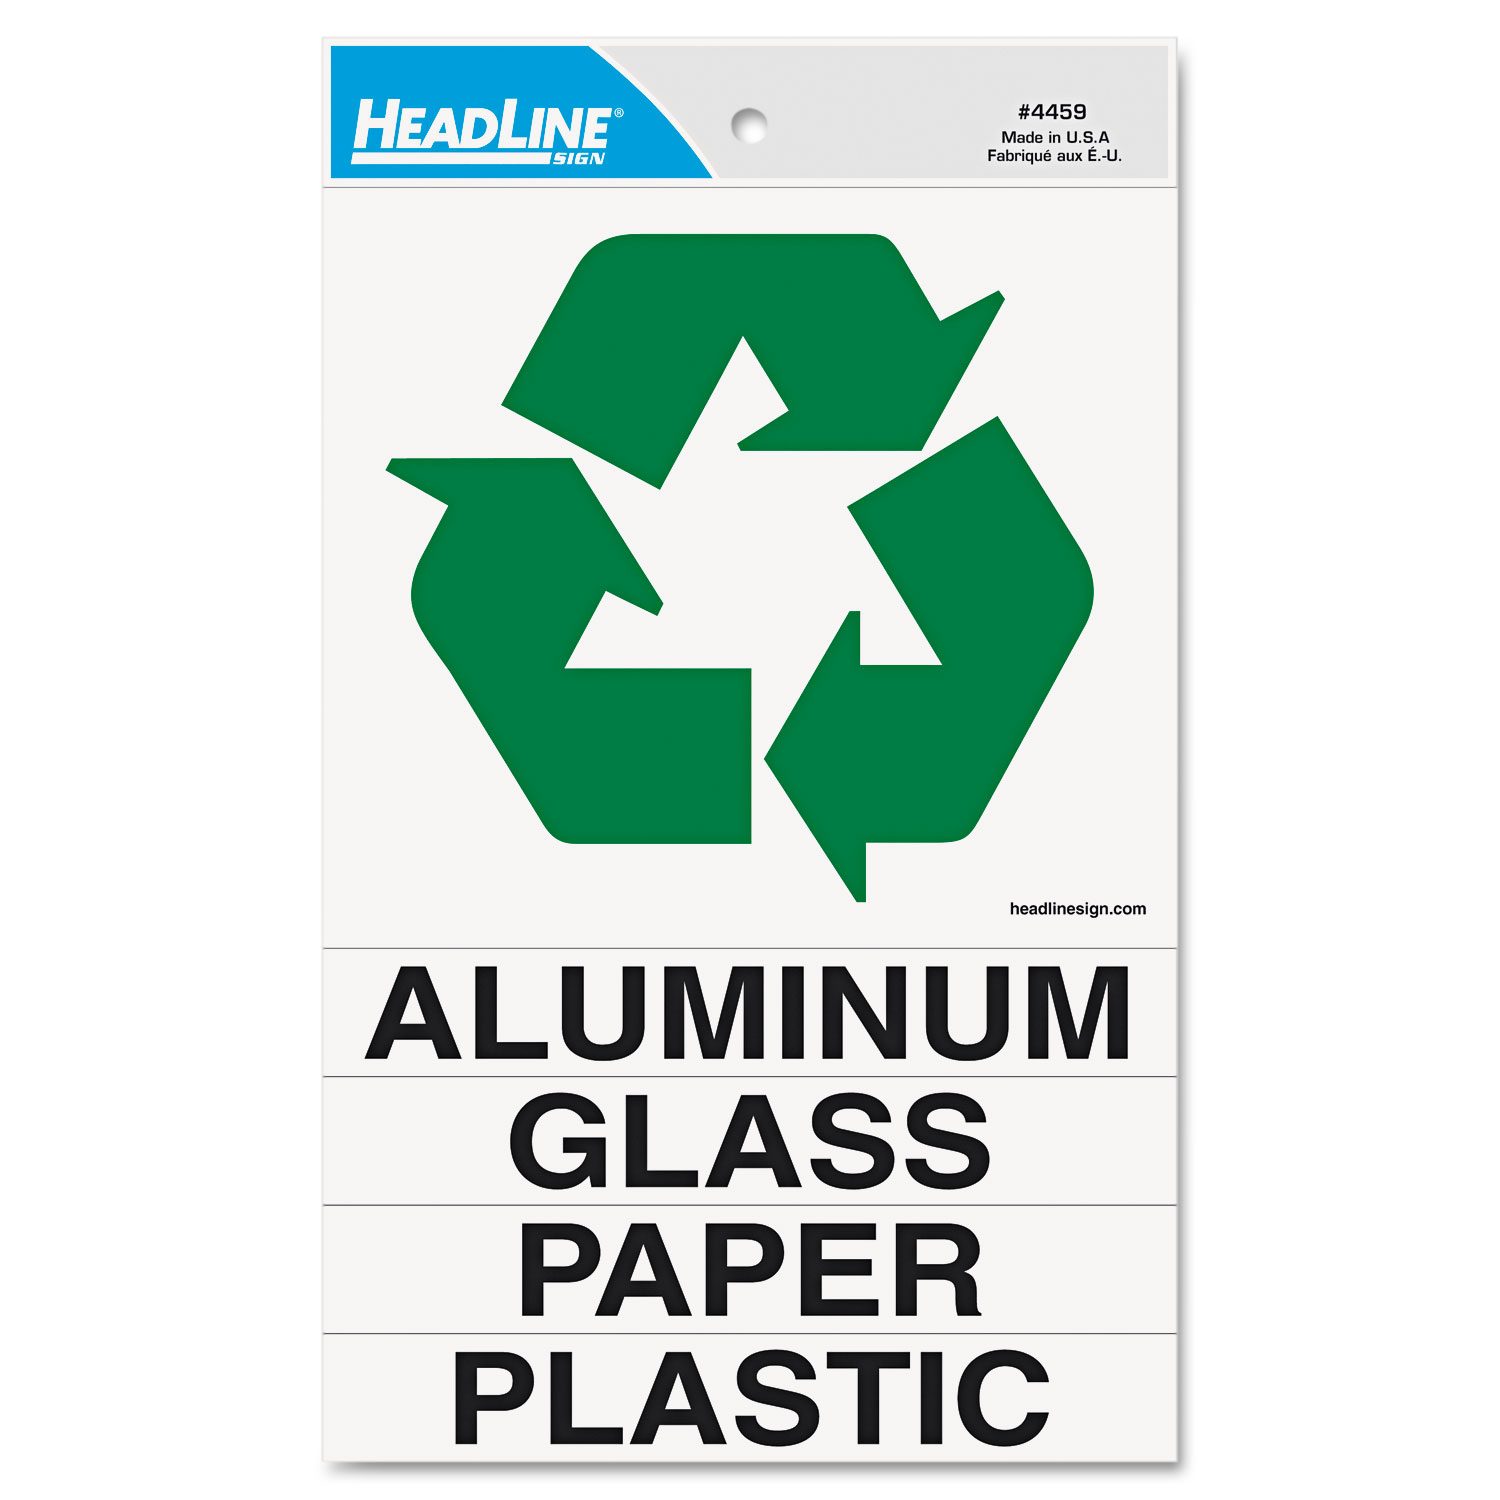  Headline Sign 4459 Self-Stick Recycled Combo Decal, Paper/Plastic/Glass/Aluminum, 5.25 x 6 - 0.88 x 6, White/Green, Kit (USS4459) 